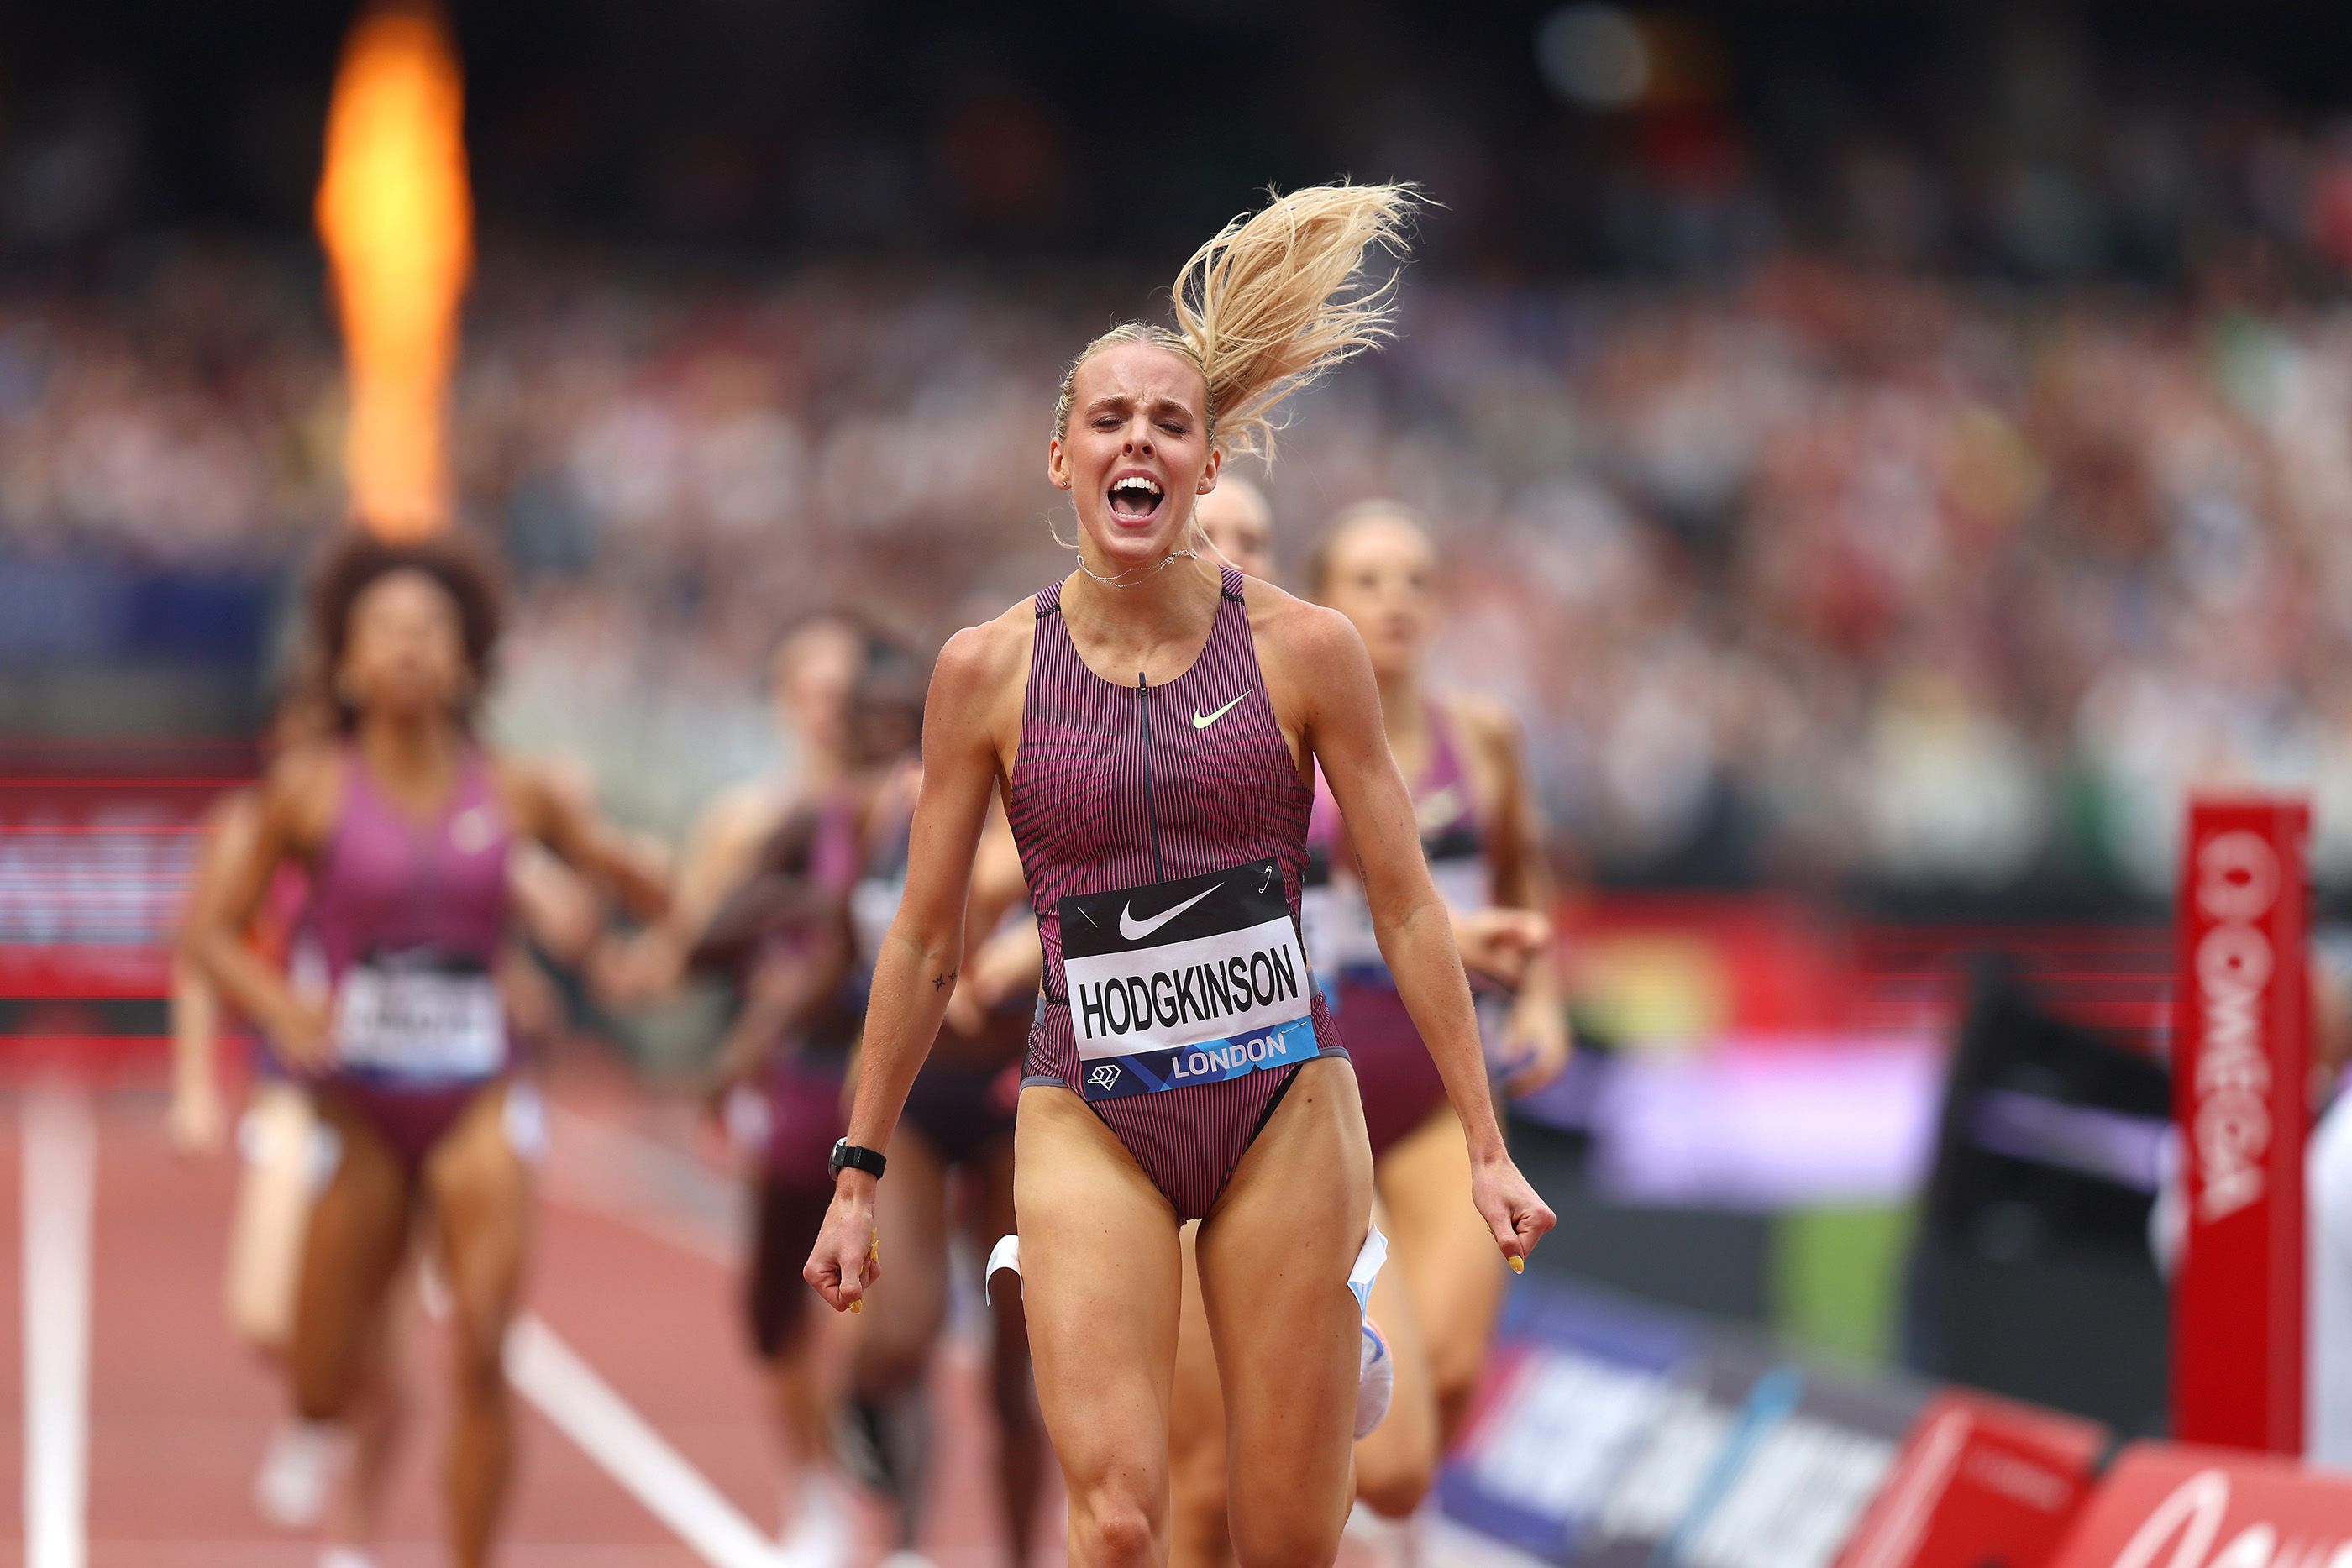 Keely Hodgkinson celebrates her 800m world lead and national record in London